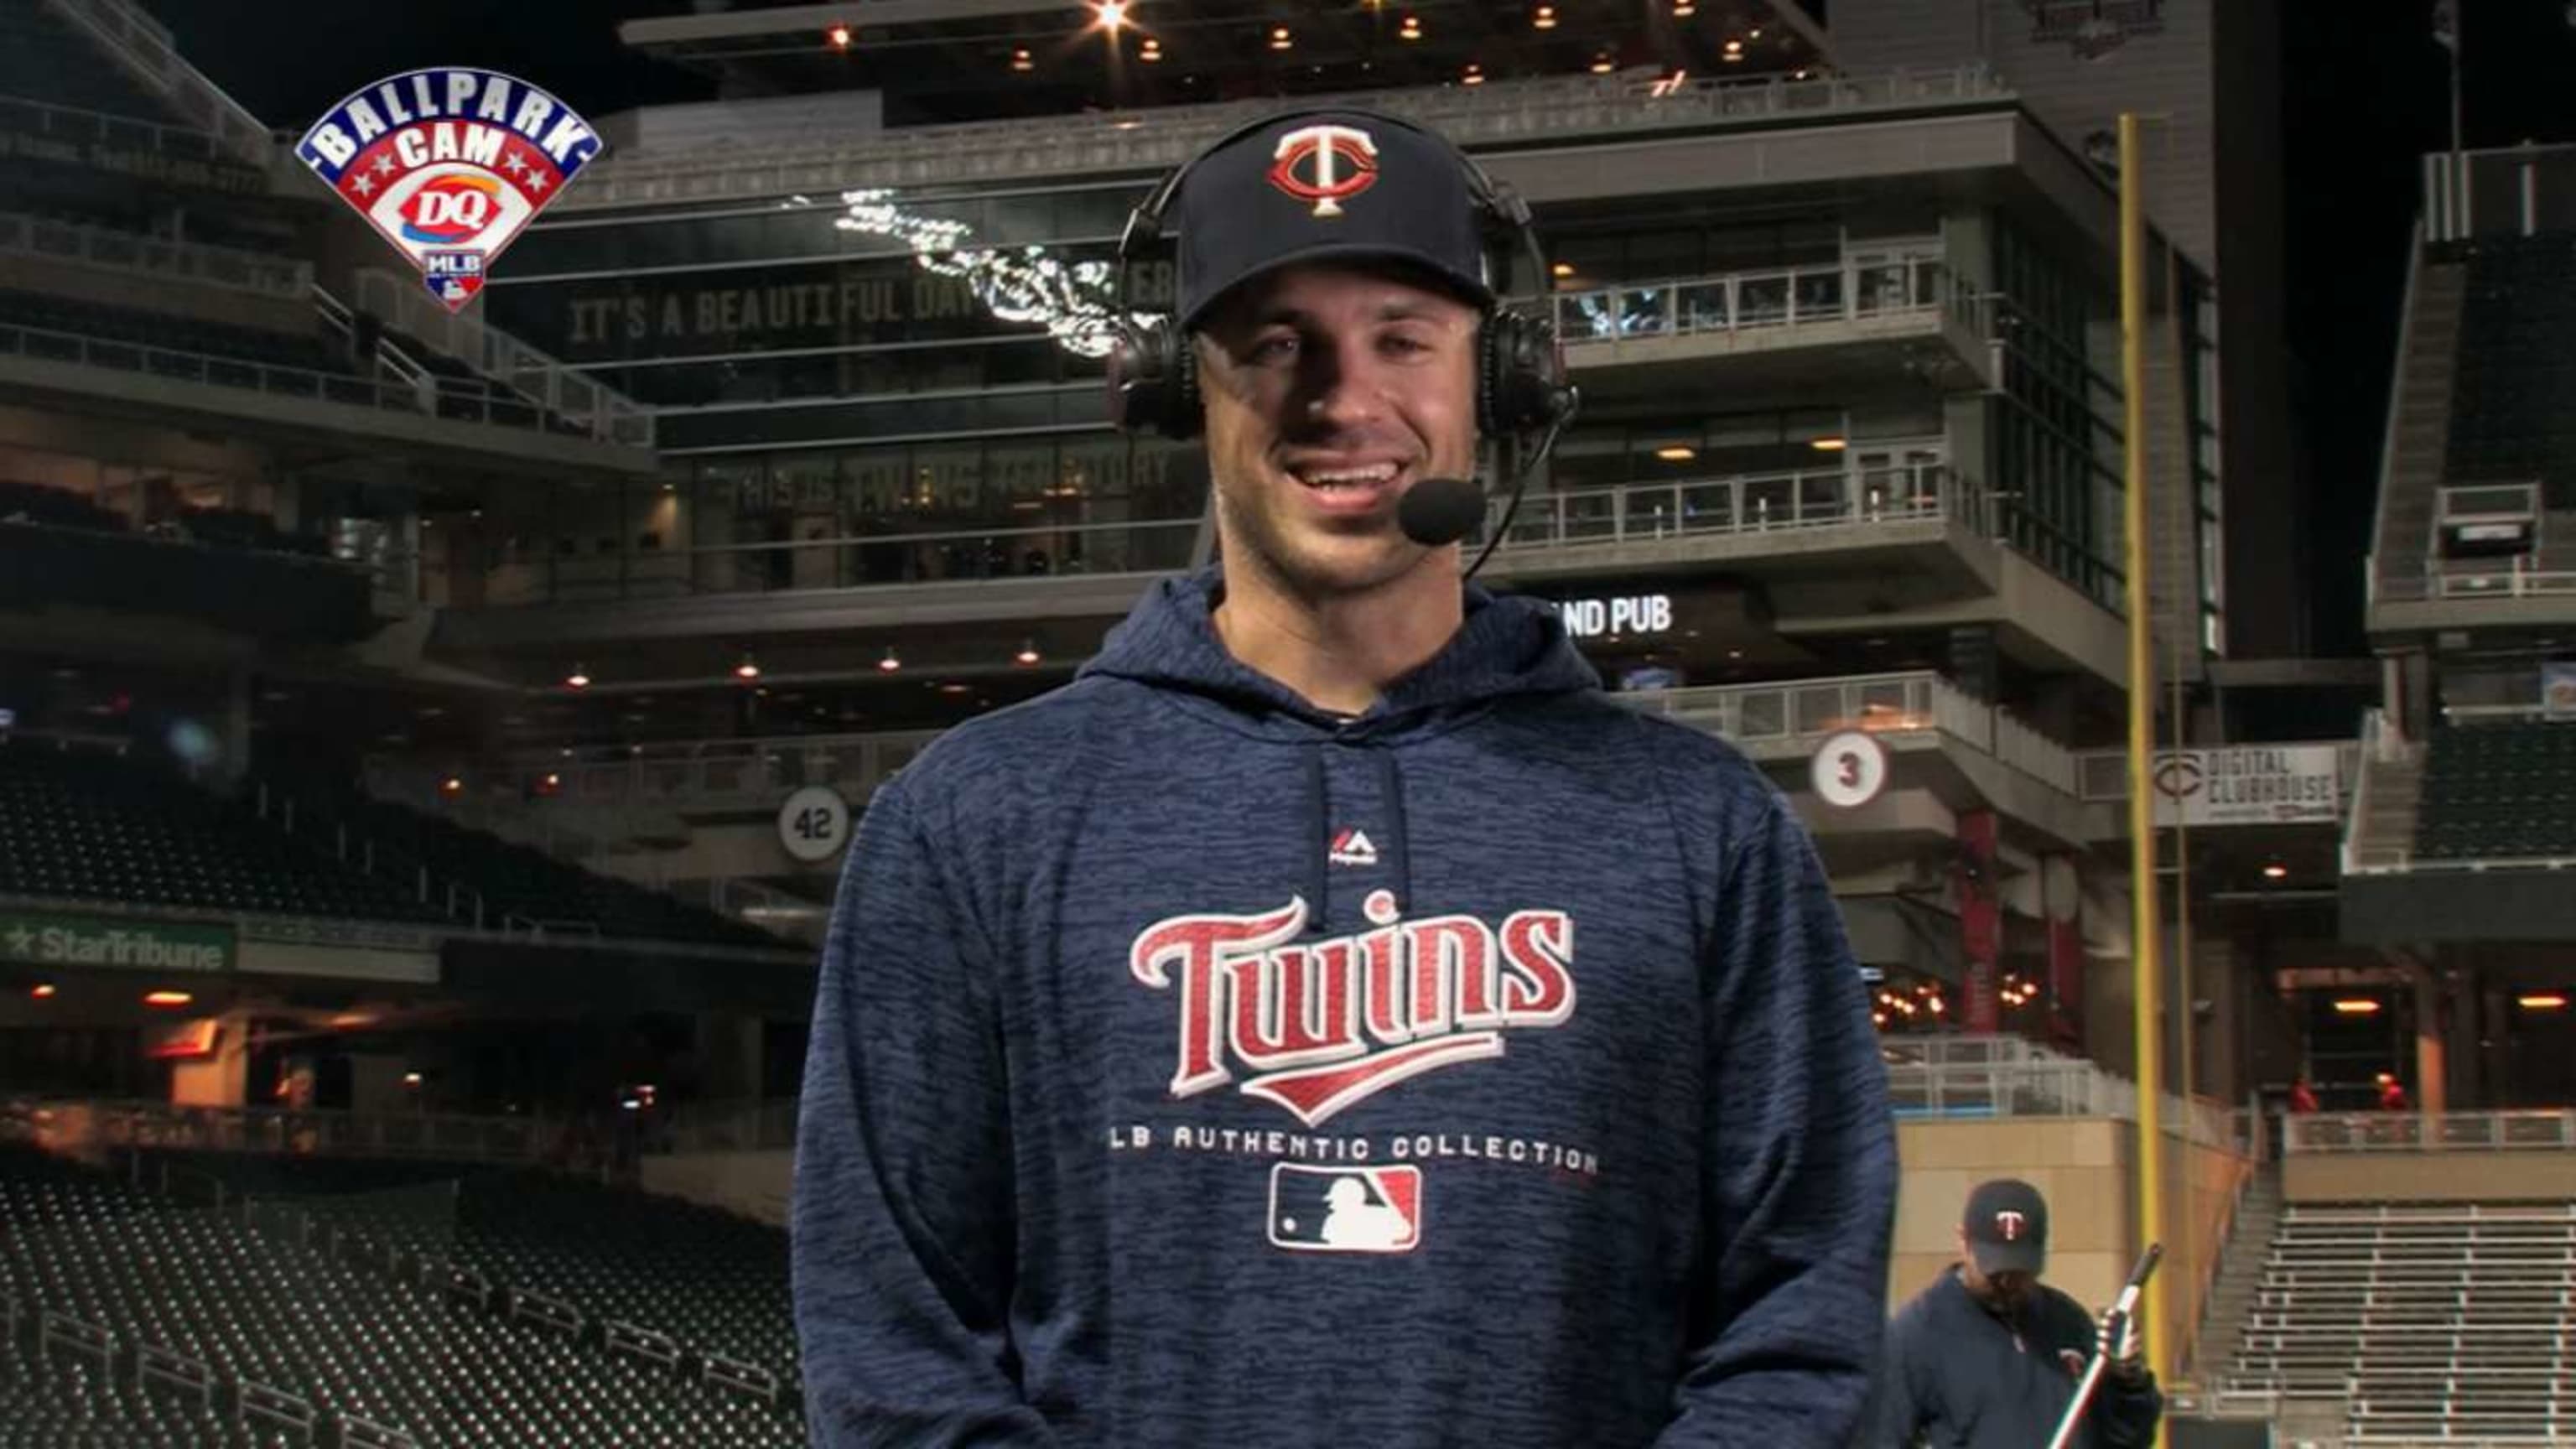 Mauer becomes 3rd player to collect 2,000 hits with Twins